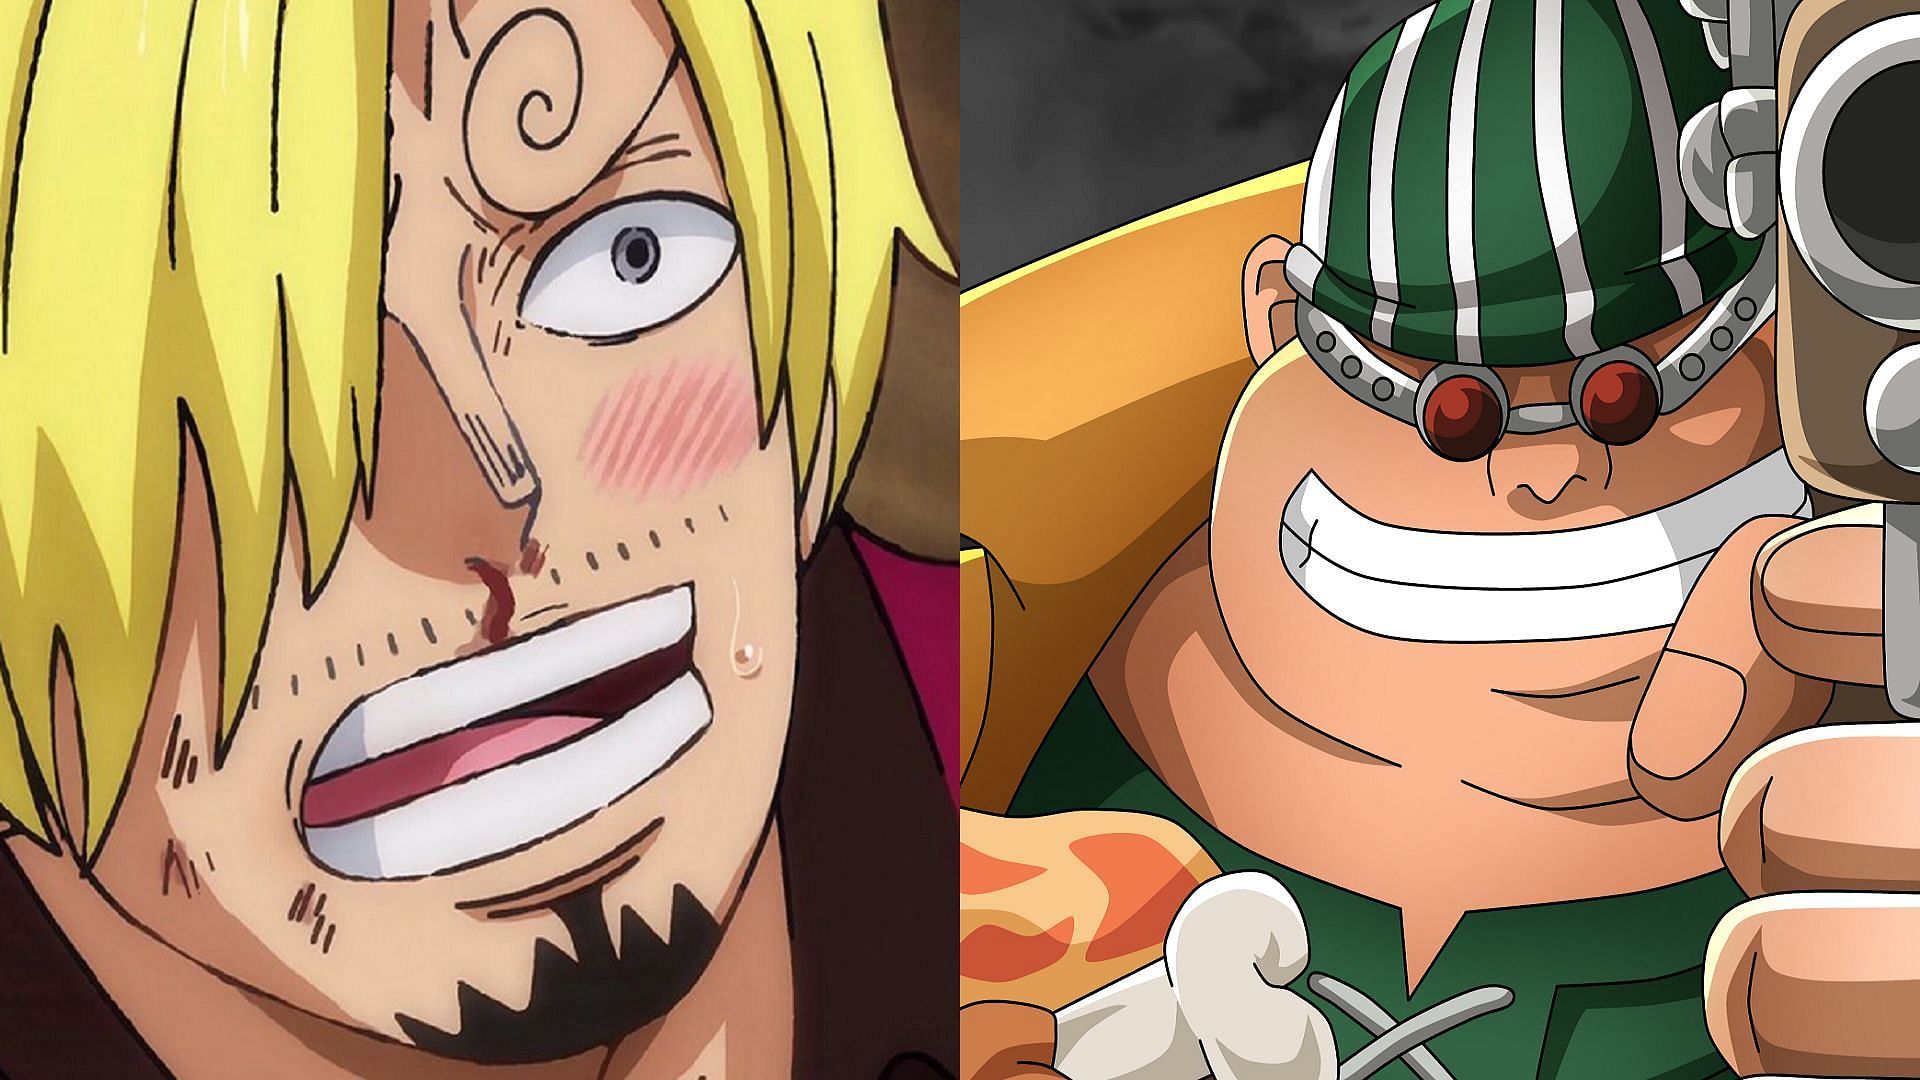 Sanji and Lucky Roux appear to be specular characters that would make a good match-up for a fight (Image via Toei Animation, One Piece)